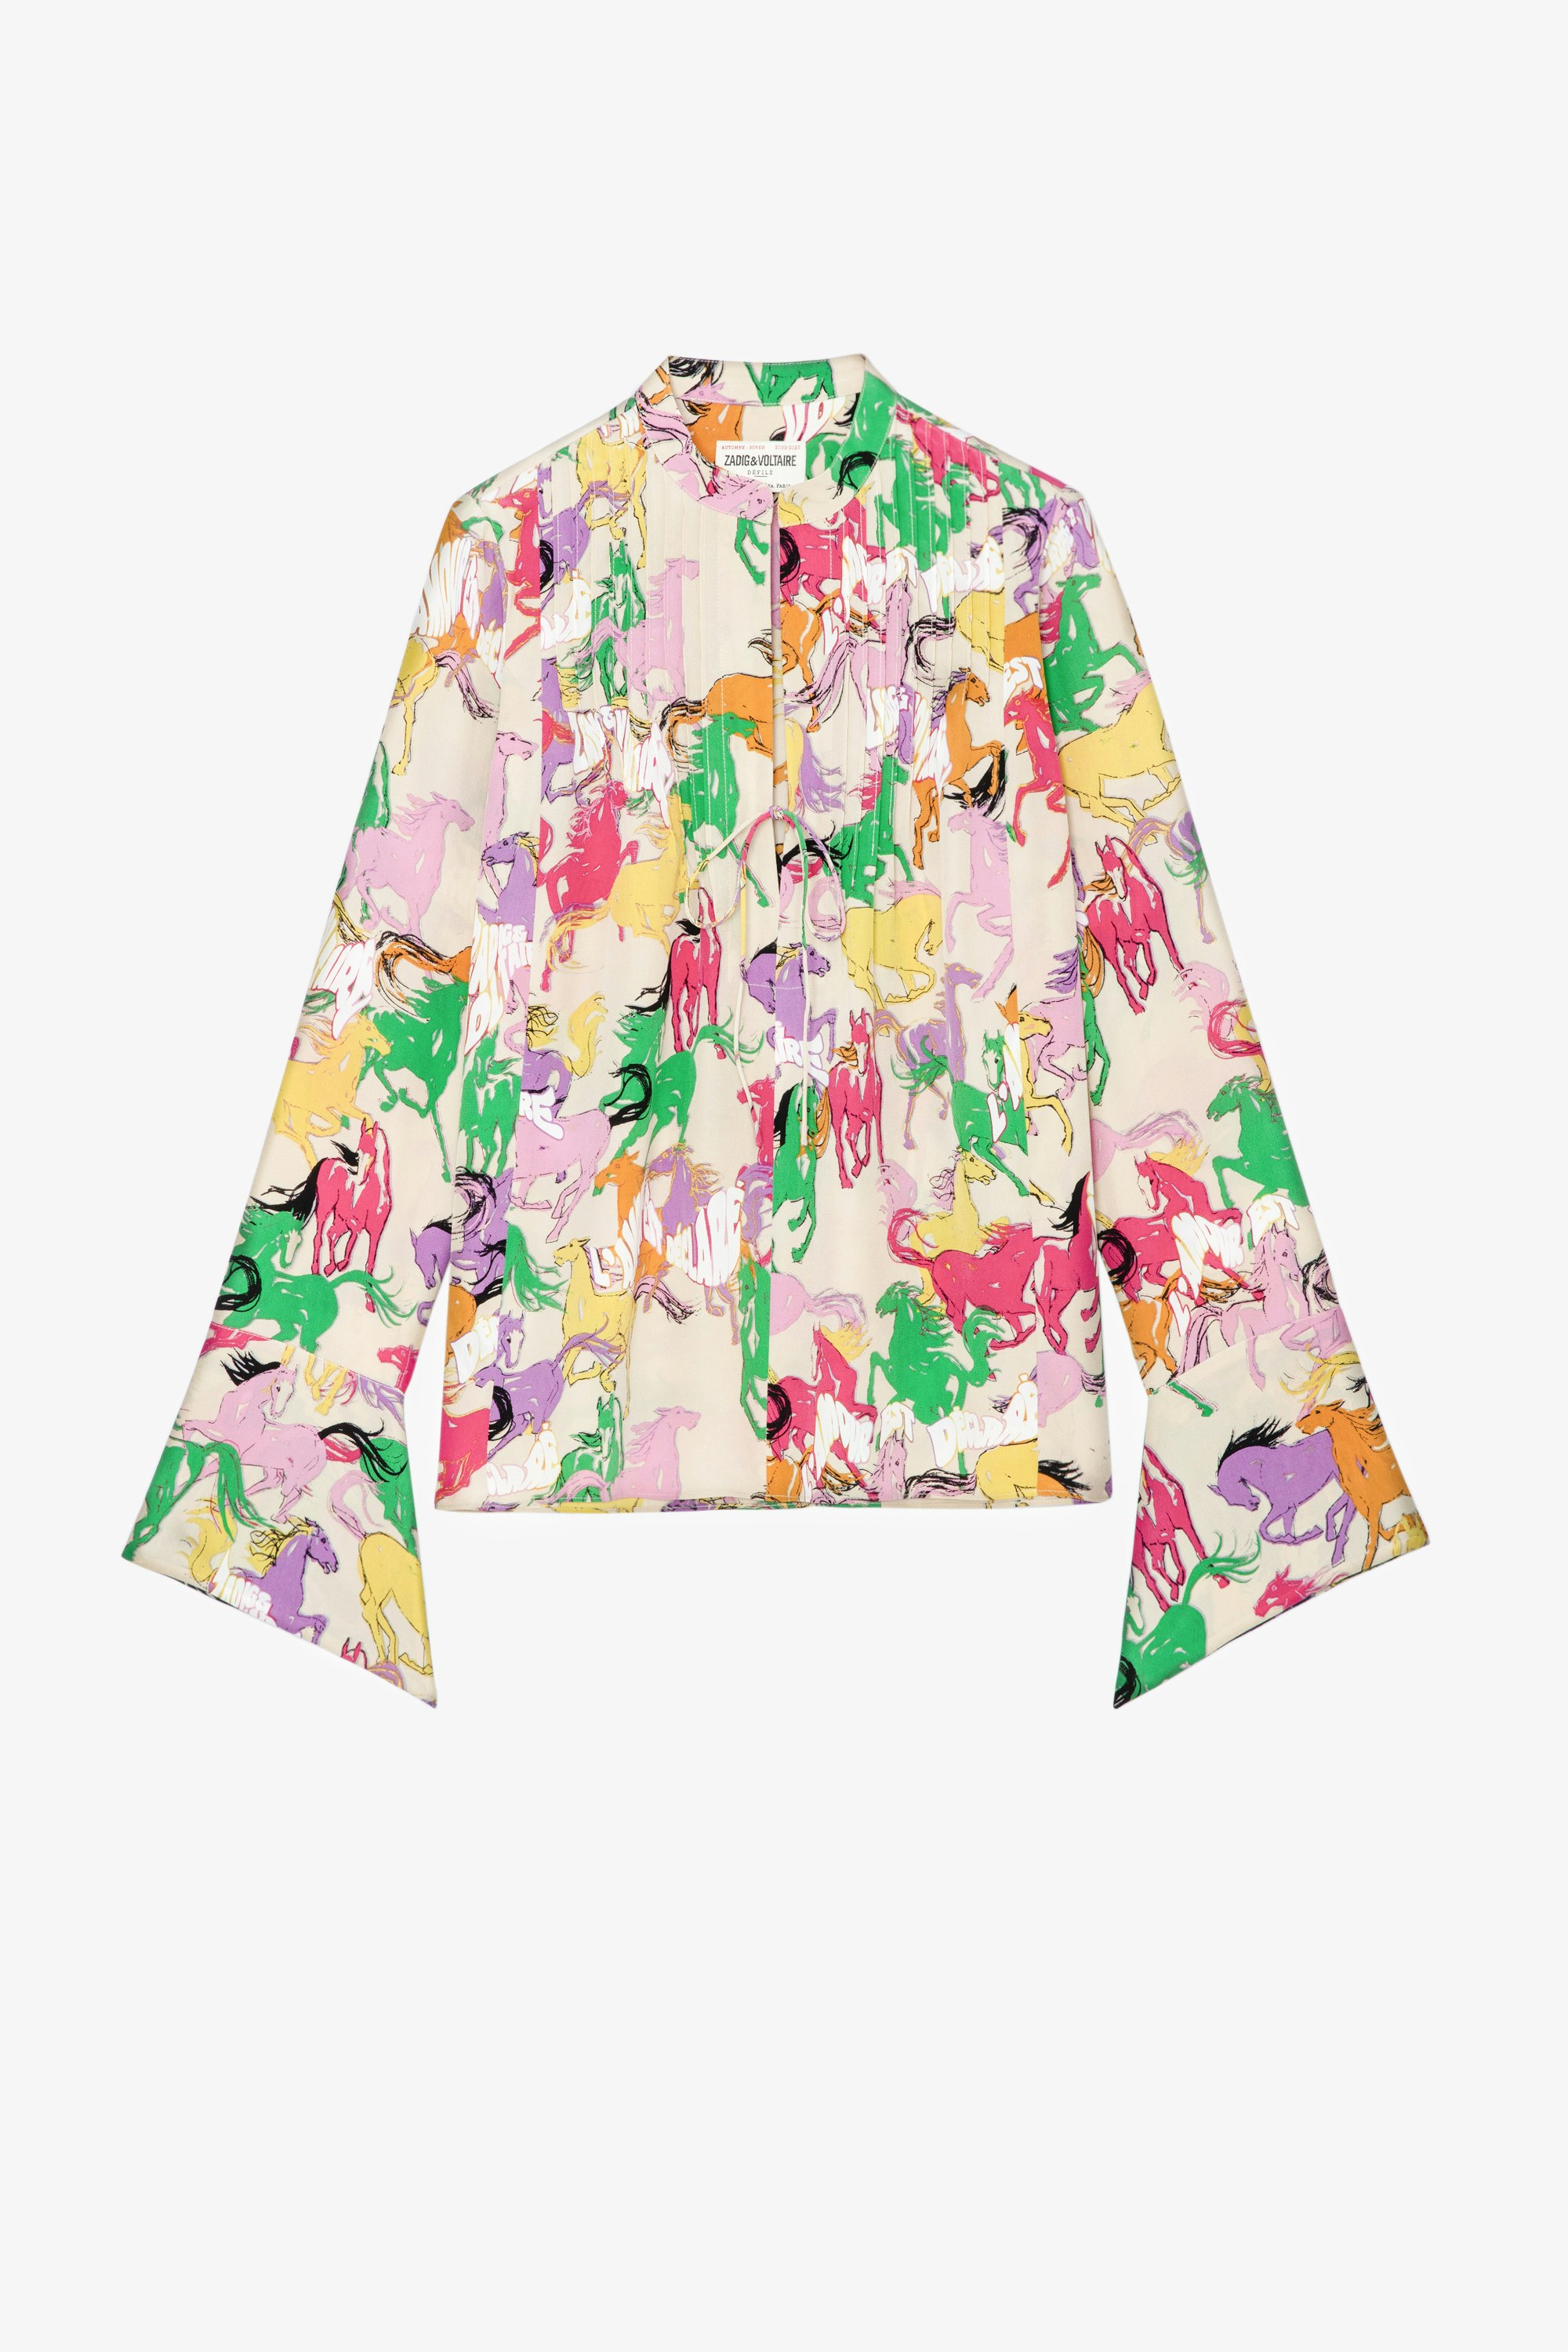 Taika Horses Diamanté シルク シャツ Women’s ecru silk shirt with draped sleeves, decorated with a multicoloured horse print 